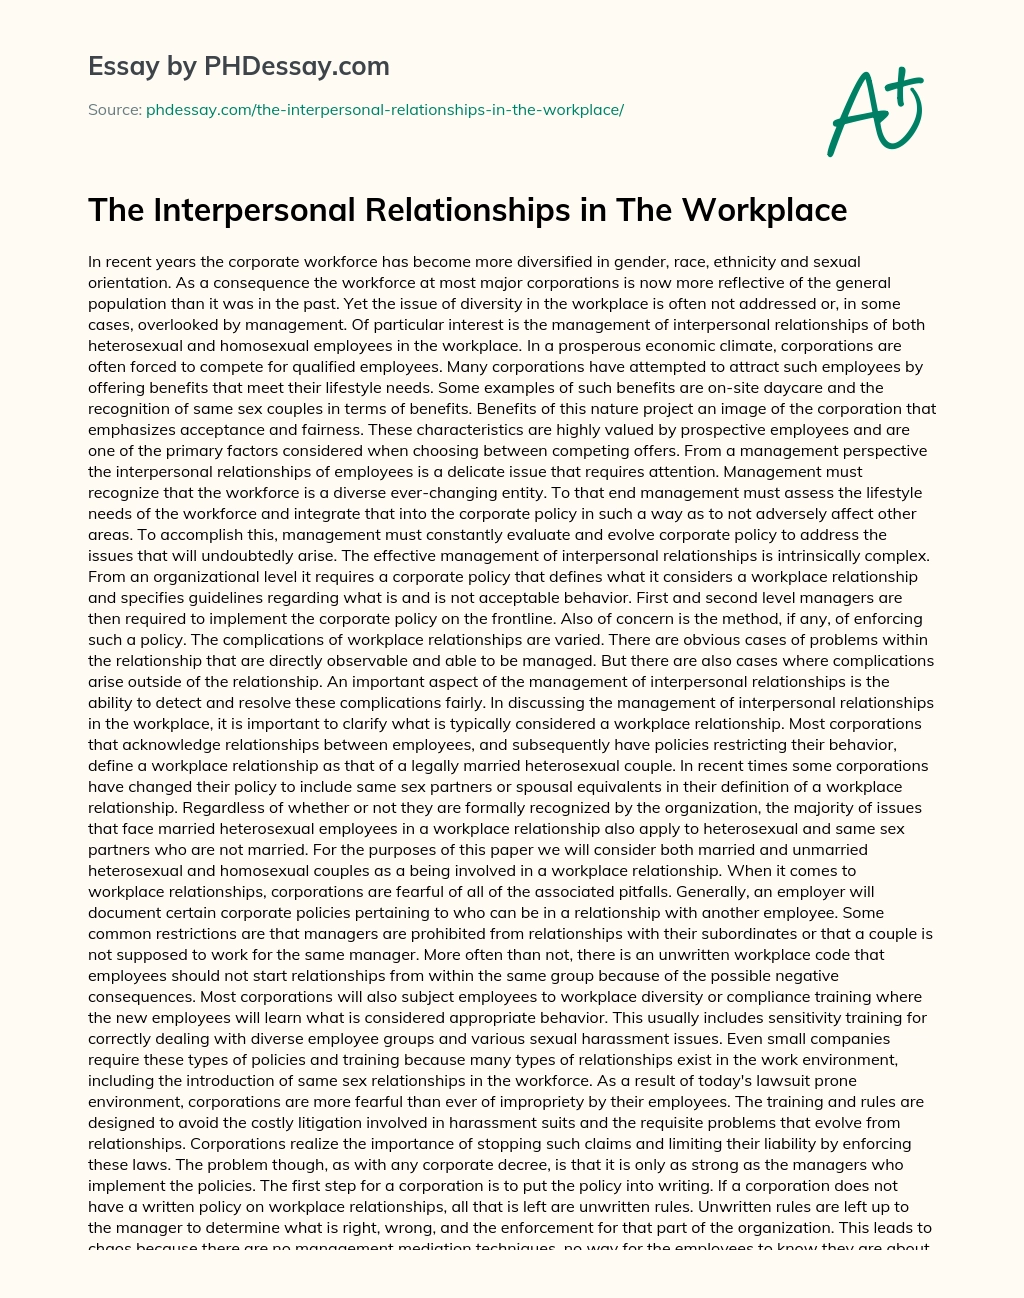 The Interpersonal Relationships in The Workplace essay